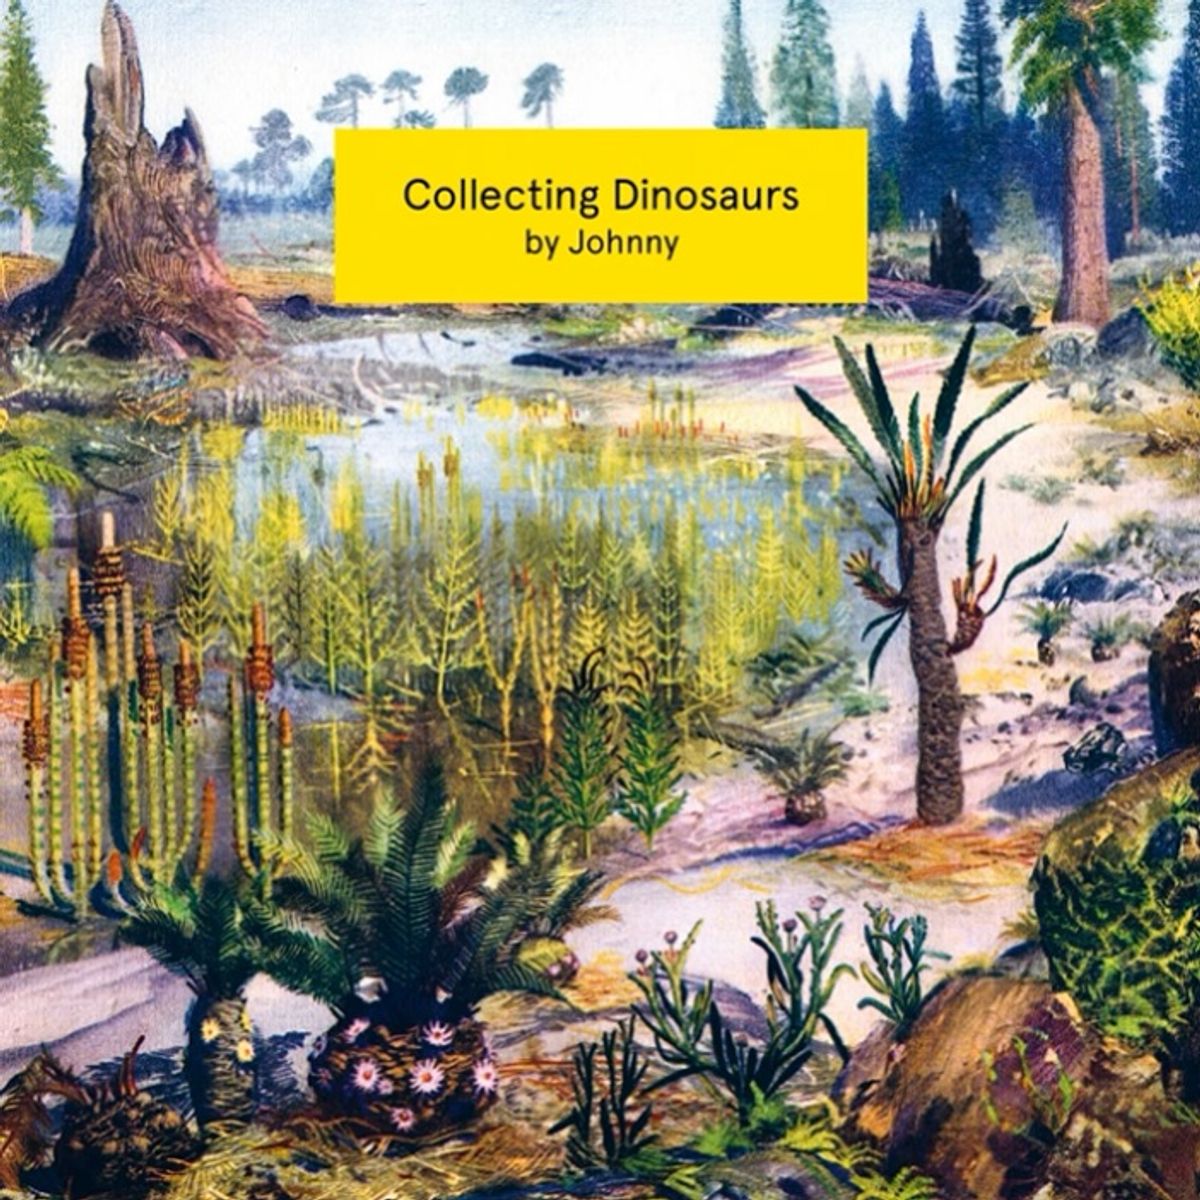 Collecting Dinosaurs